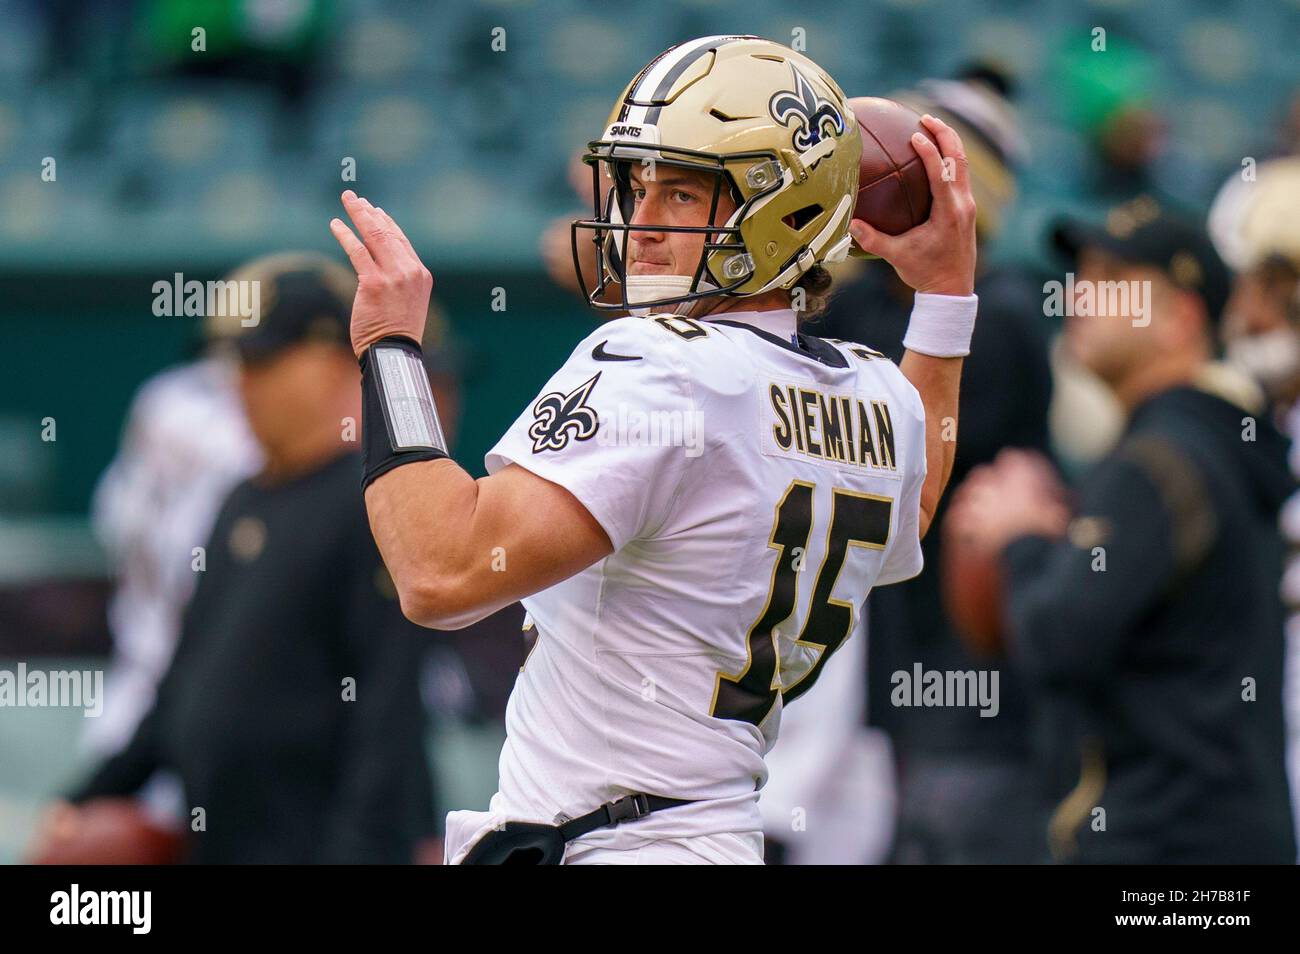 Philadelphia, Pennsylvania, USA. 21st Nov, 2021. New Orleans Saints quarterback Trevor Siemian (15) in action prior to the NFL game between the New Orleans Saints and the Philadelphia Eagles at Lincoln Financial Field in Philadelphia, Pennsylvania. Christopher Szagola/CSM/Alamy Live News Stock Photo